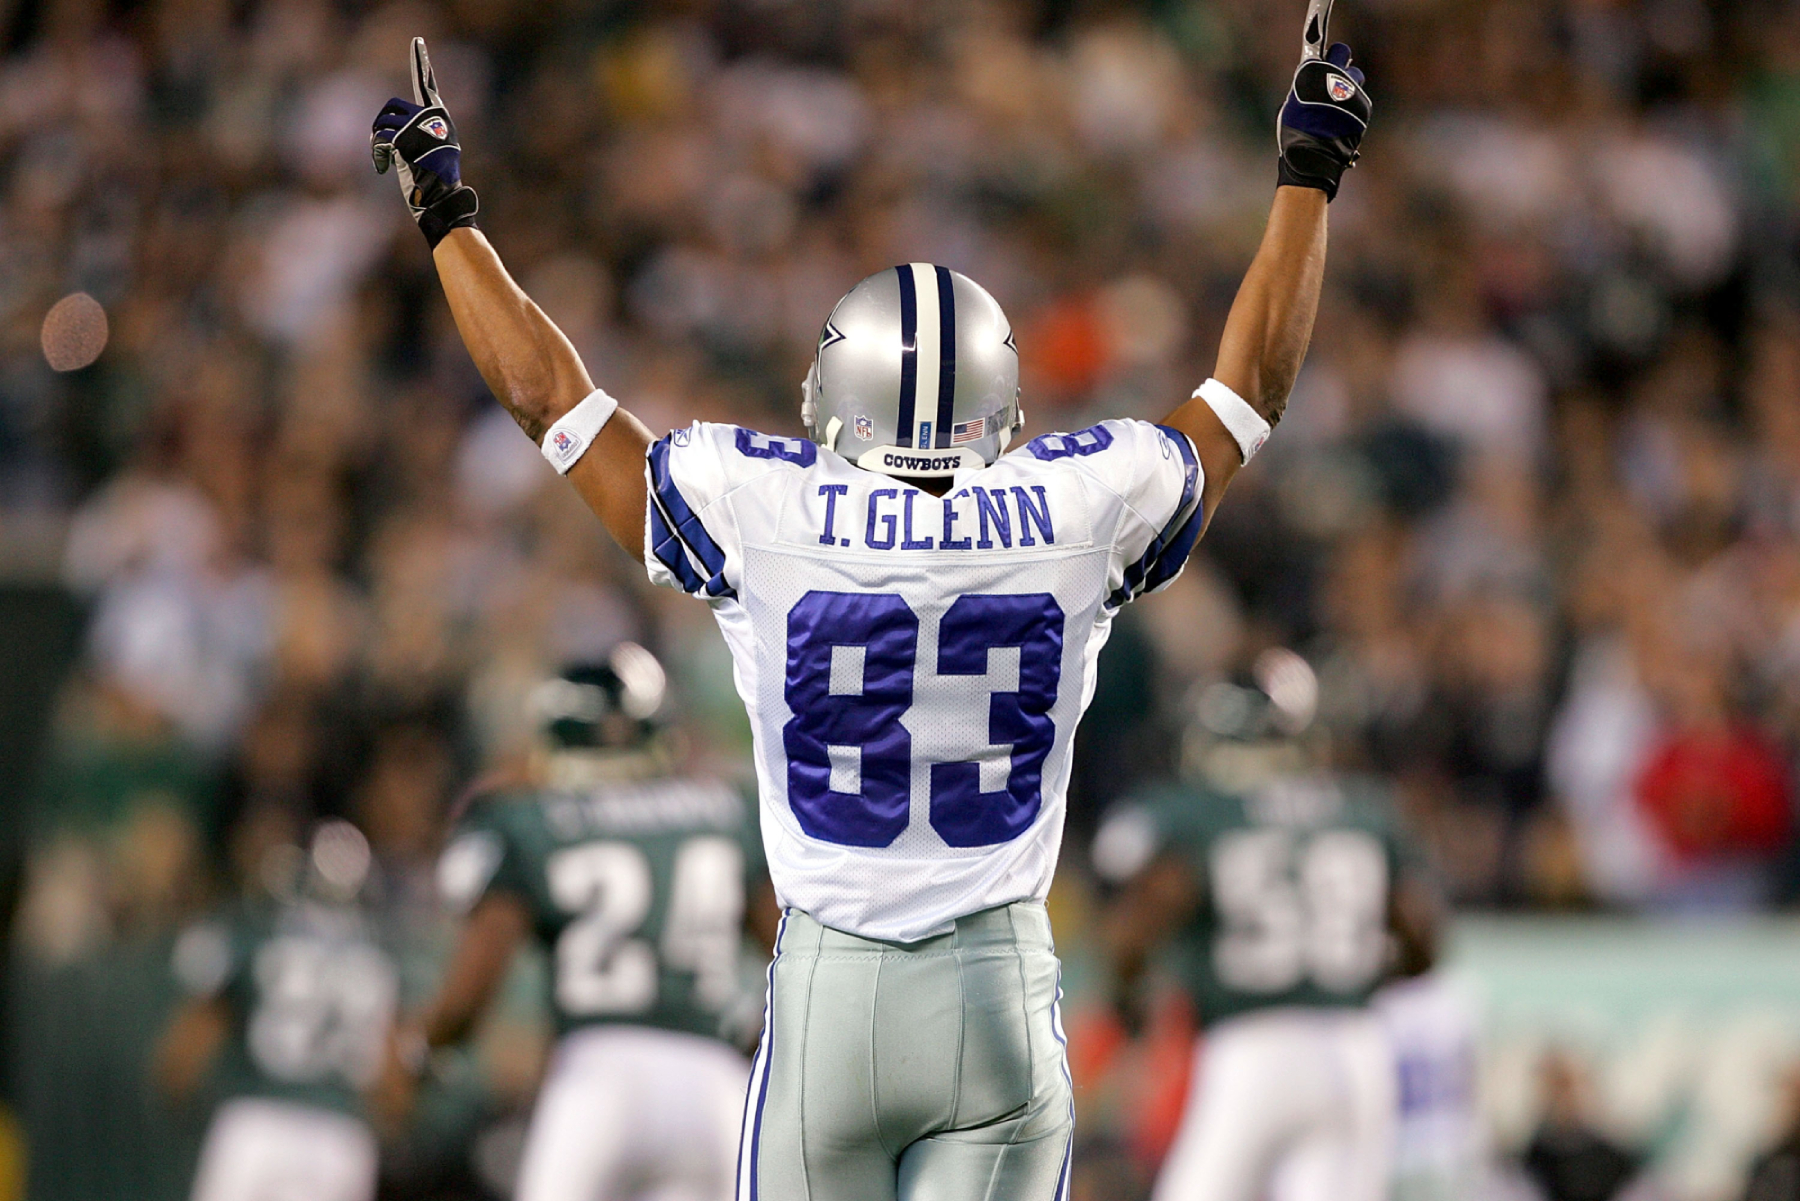 After succeeding at Ohio State, Terry Glenn had a nice career with the Dallas Cowboys and the Patriots. He tragically died too soon, though.